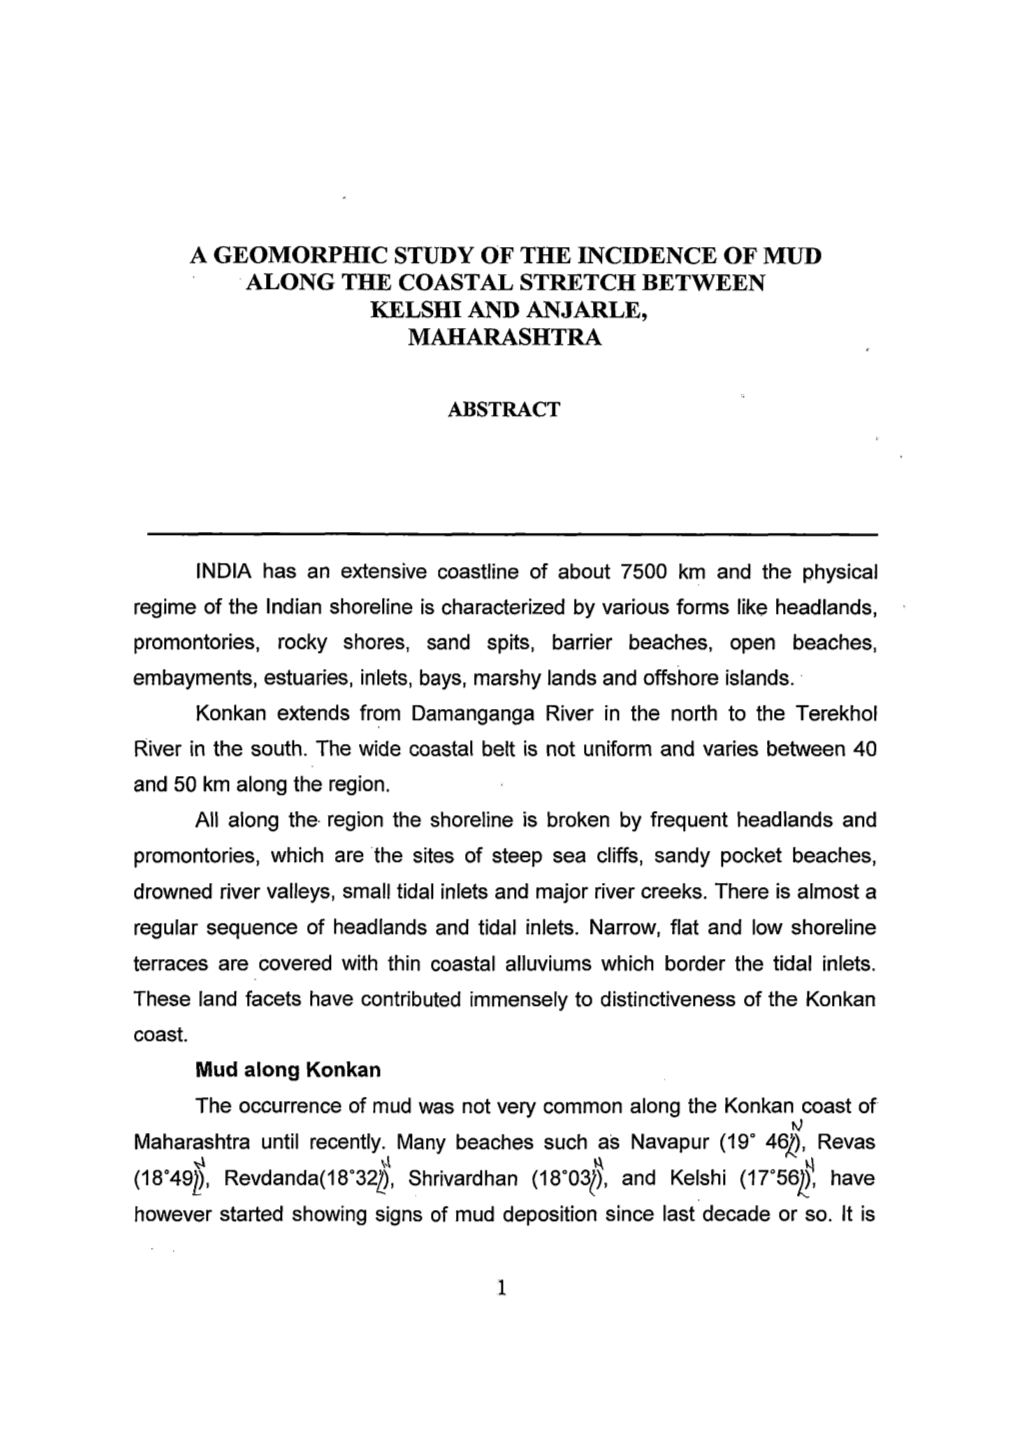 A Geomorphic Study of the Incidence of Mud Along the Coastal Stretch Between Kelshi and Anjarle, Maharashtra Abstract